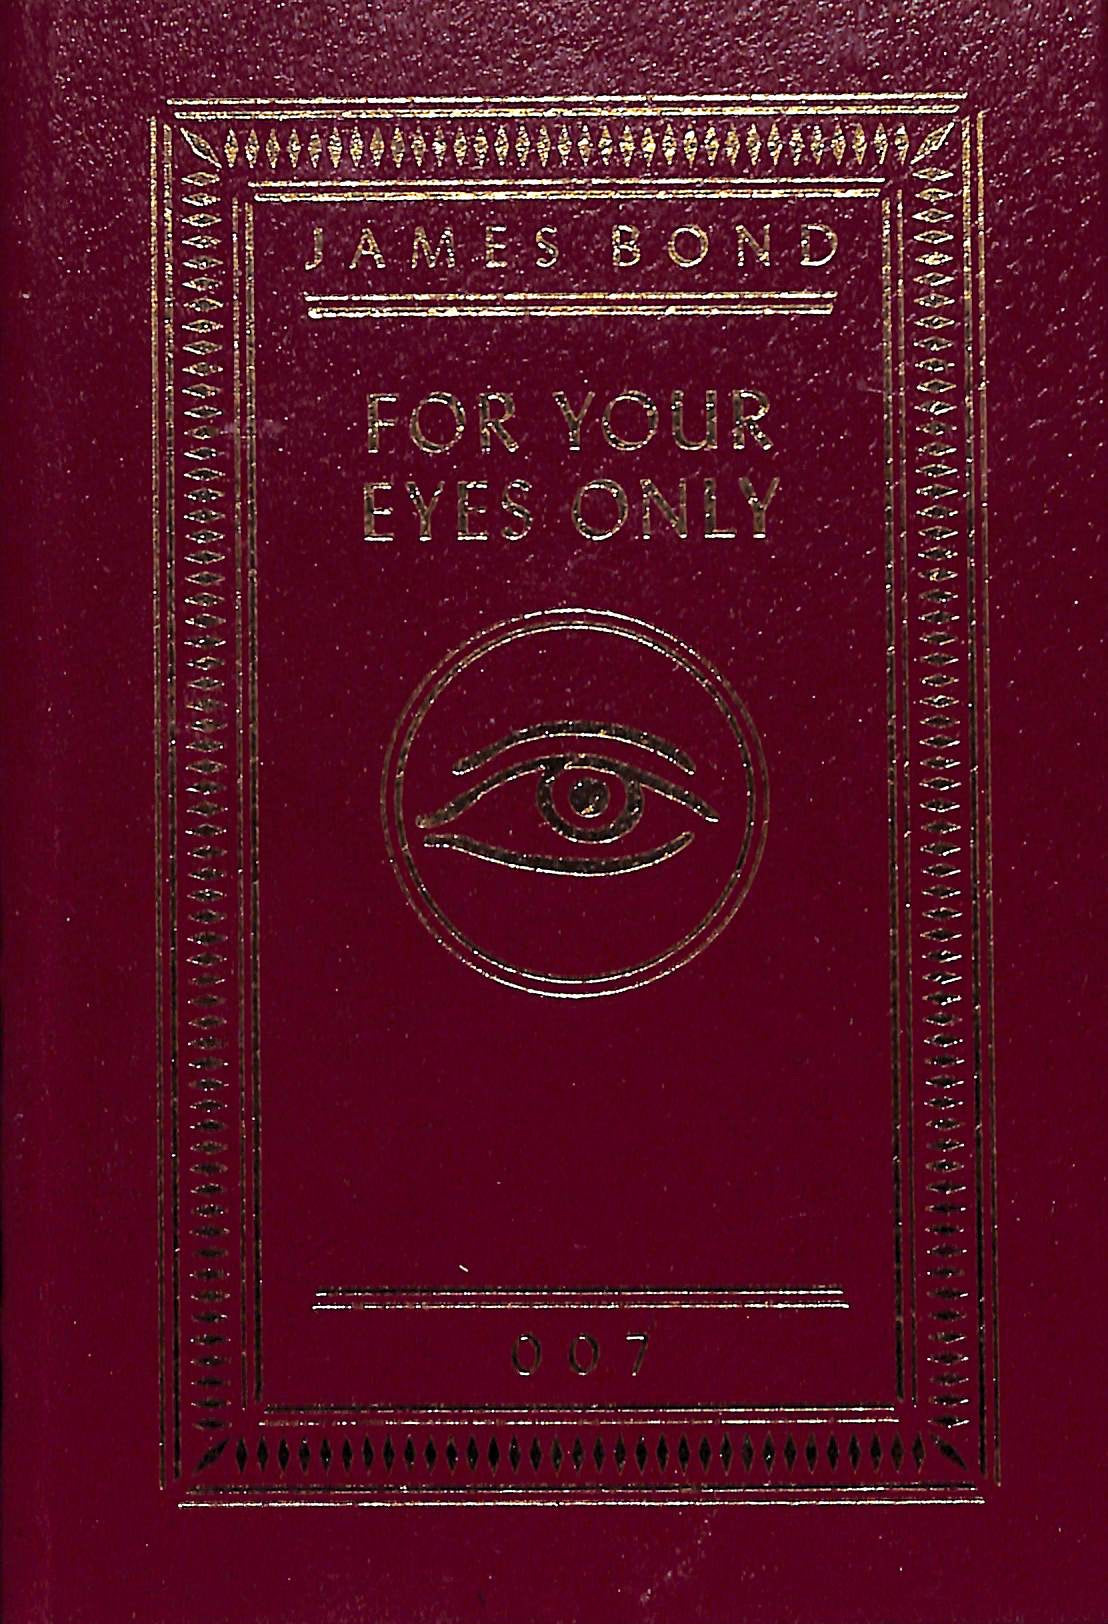 "For Your Eyes Only" FLEMING, Ian (SOLD)